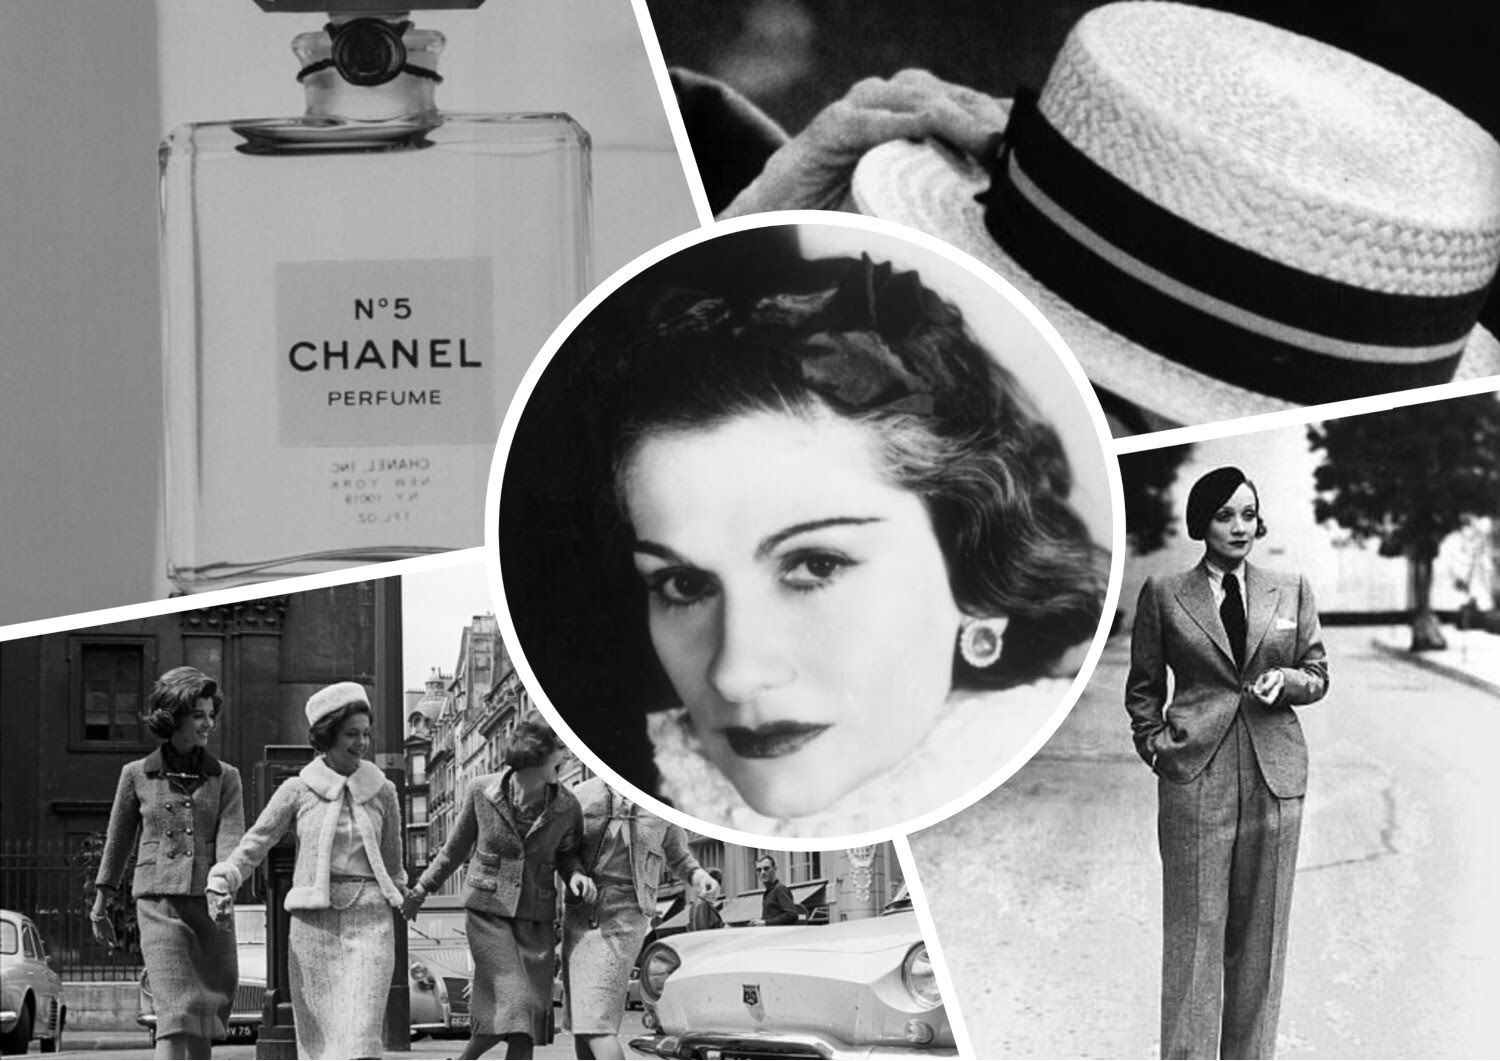 HOW WOMEN FASHION WAS CHANGED BY COCO CHANEL